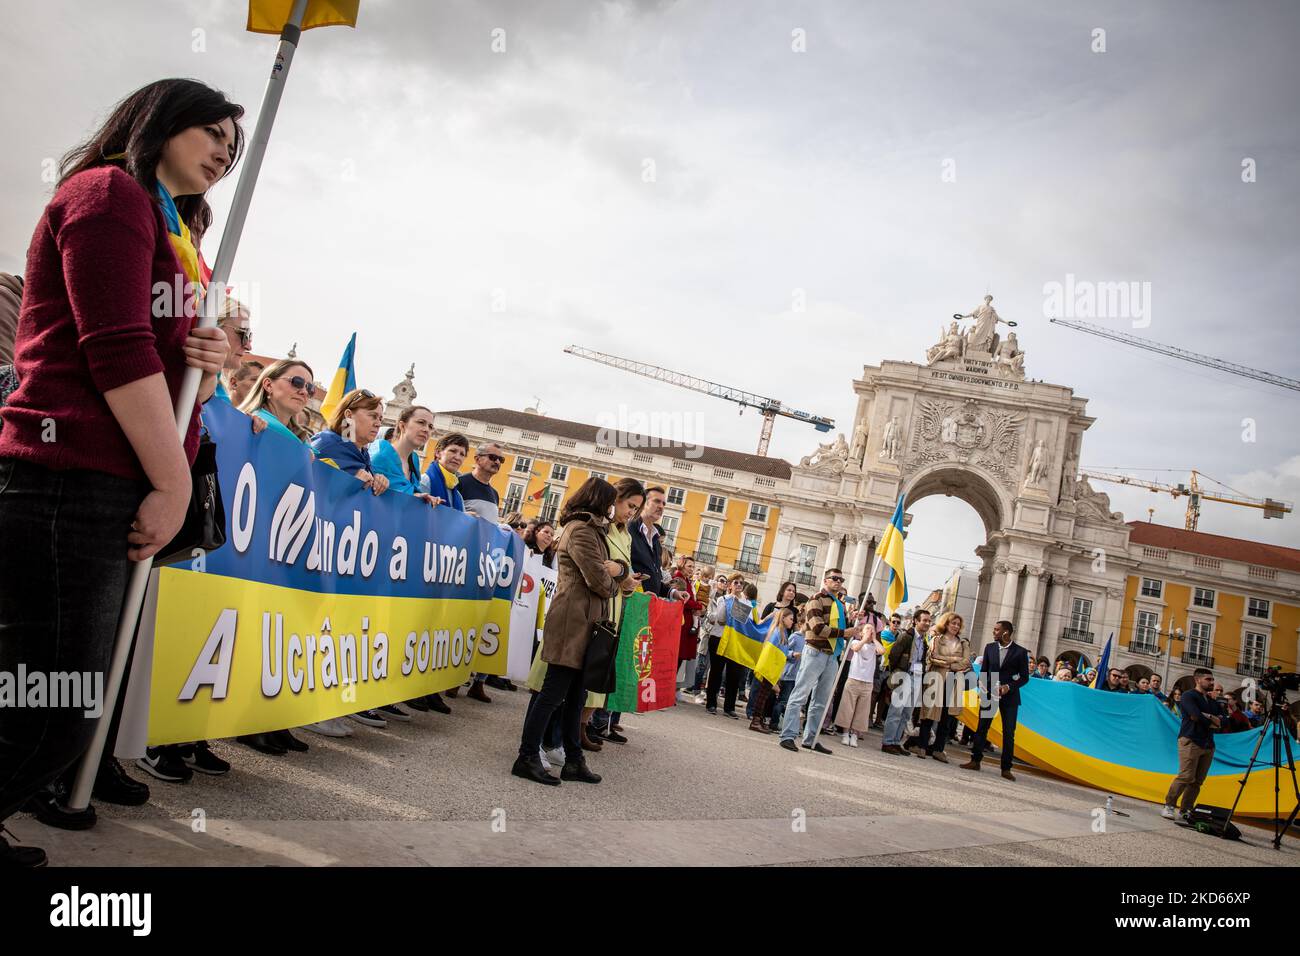 People wearing the Ukrainian flag are seen in Praca do Comercio, in Lisbon, Portugal during a demonstration to show solidarity with the people of that country following the Russian invasion on March 27, 2022. - More than 3.8 million people have fled Ukraine since Russia's invasion a month ago, UN figures showed on March 27, but the flow of refugees has slowed down markedly. The UN refugee agency, UNHCR, said 3,821,049 Ukrainians had fled the country -- an increase of 48,450 from the figures of March 26. (Photo by Manuel Romano/NurPhoto) Stock Photo